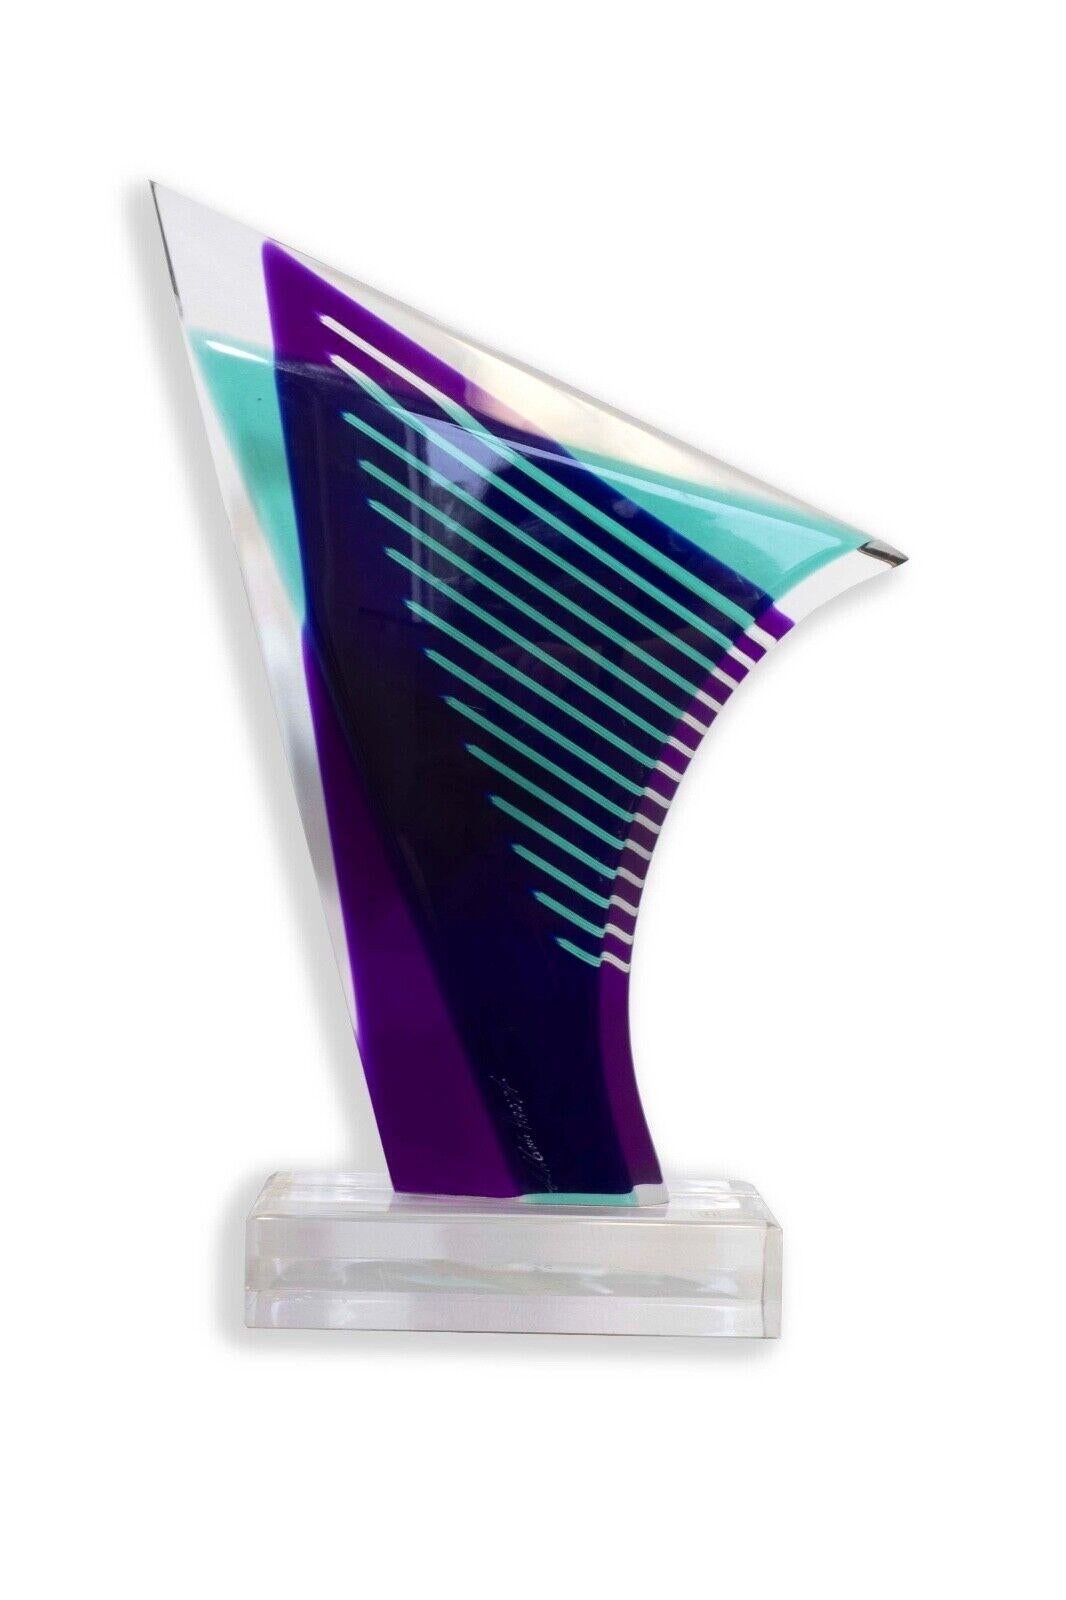 The Shlomi Haziza Lucite Purple and Turquoise Abstract Sculpture is a striking piece of contemporary modern art that captures the essence of fluidity and vibrant colors. Created by the renowned artist Shlomi Haziza, this sculpture showcases a